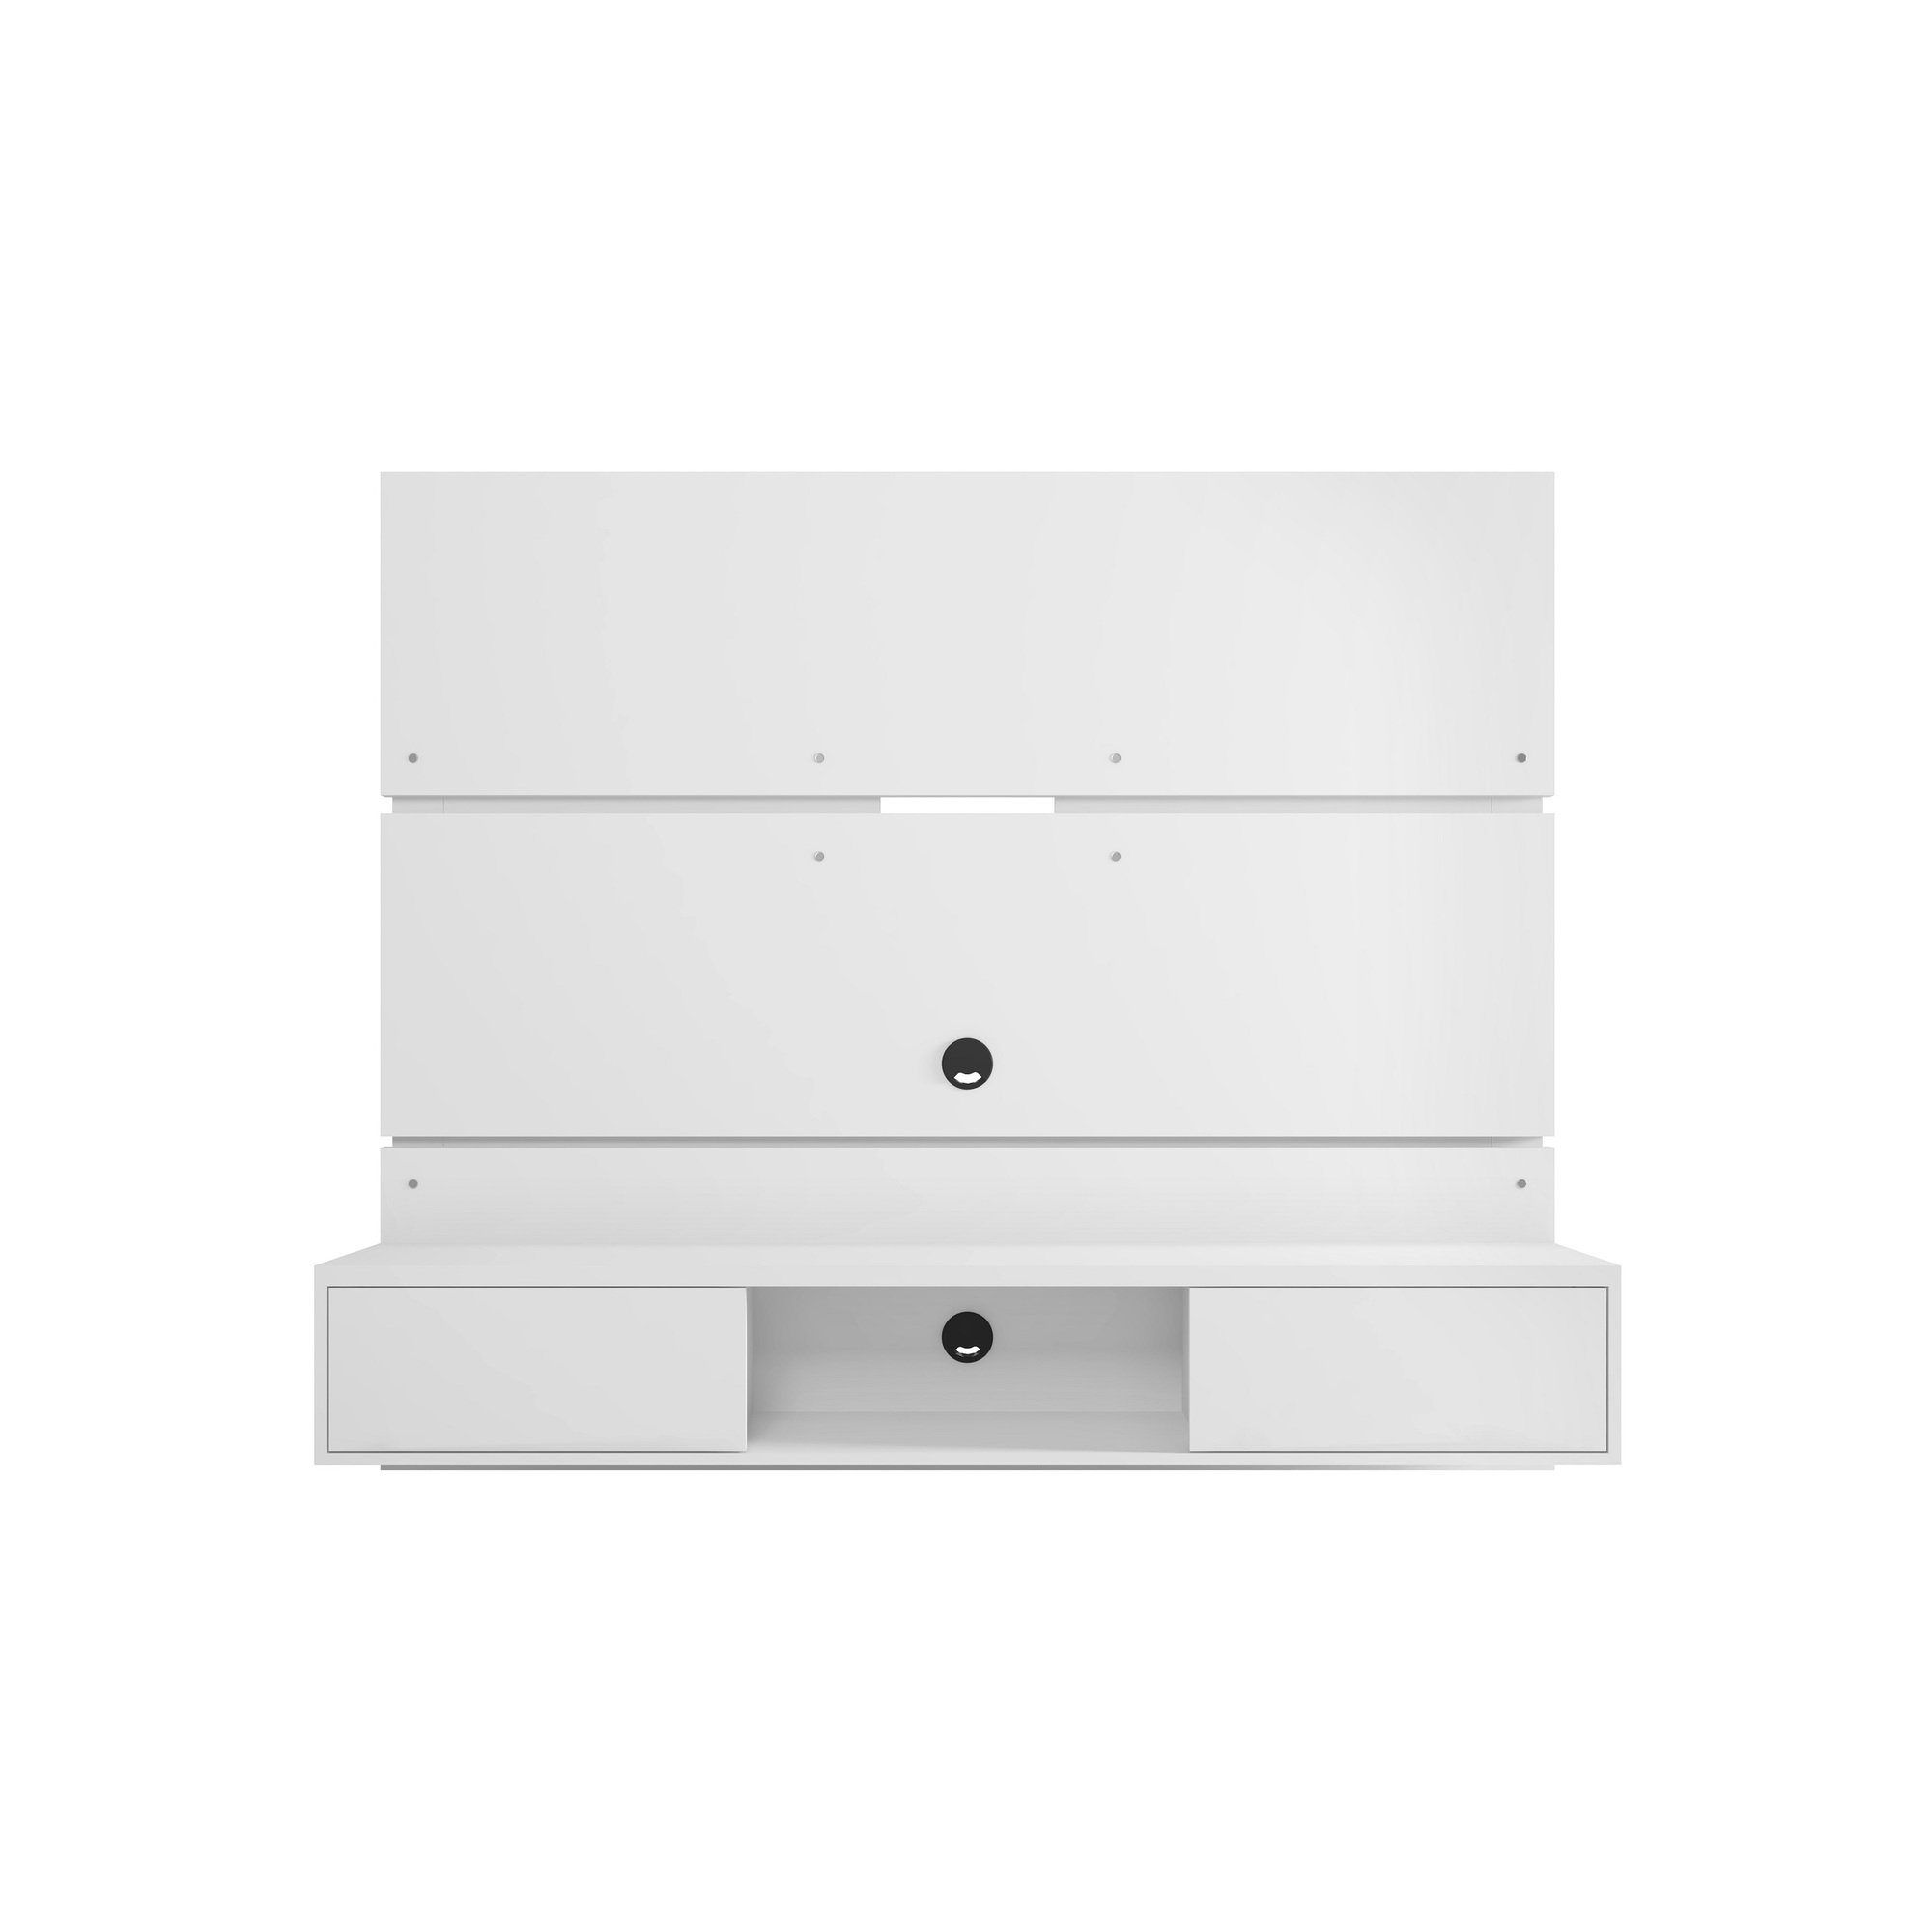 Manhattan Comfort, Vernon 62.99 Floating Wall Ent Cntr in White, Width 62.99 in, Height 53.54 in, Depth 12.87 in, Model 236BMC